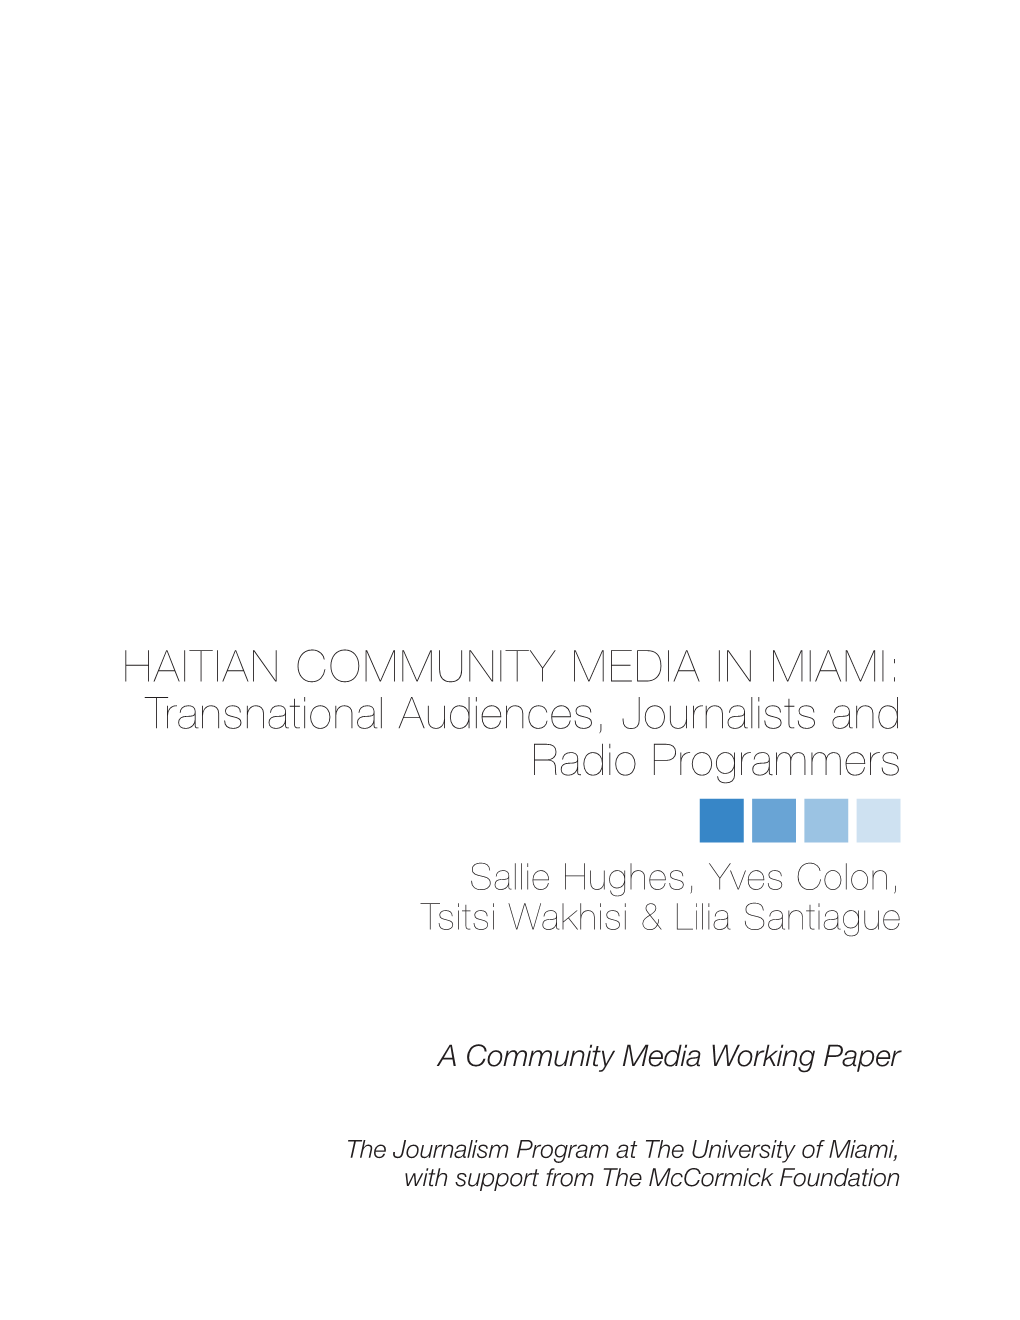 HAITIAN COMMUNITY MEDIA in MIAMI: Transnational Audiences, Journalists and Radio Programmers